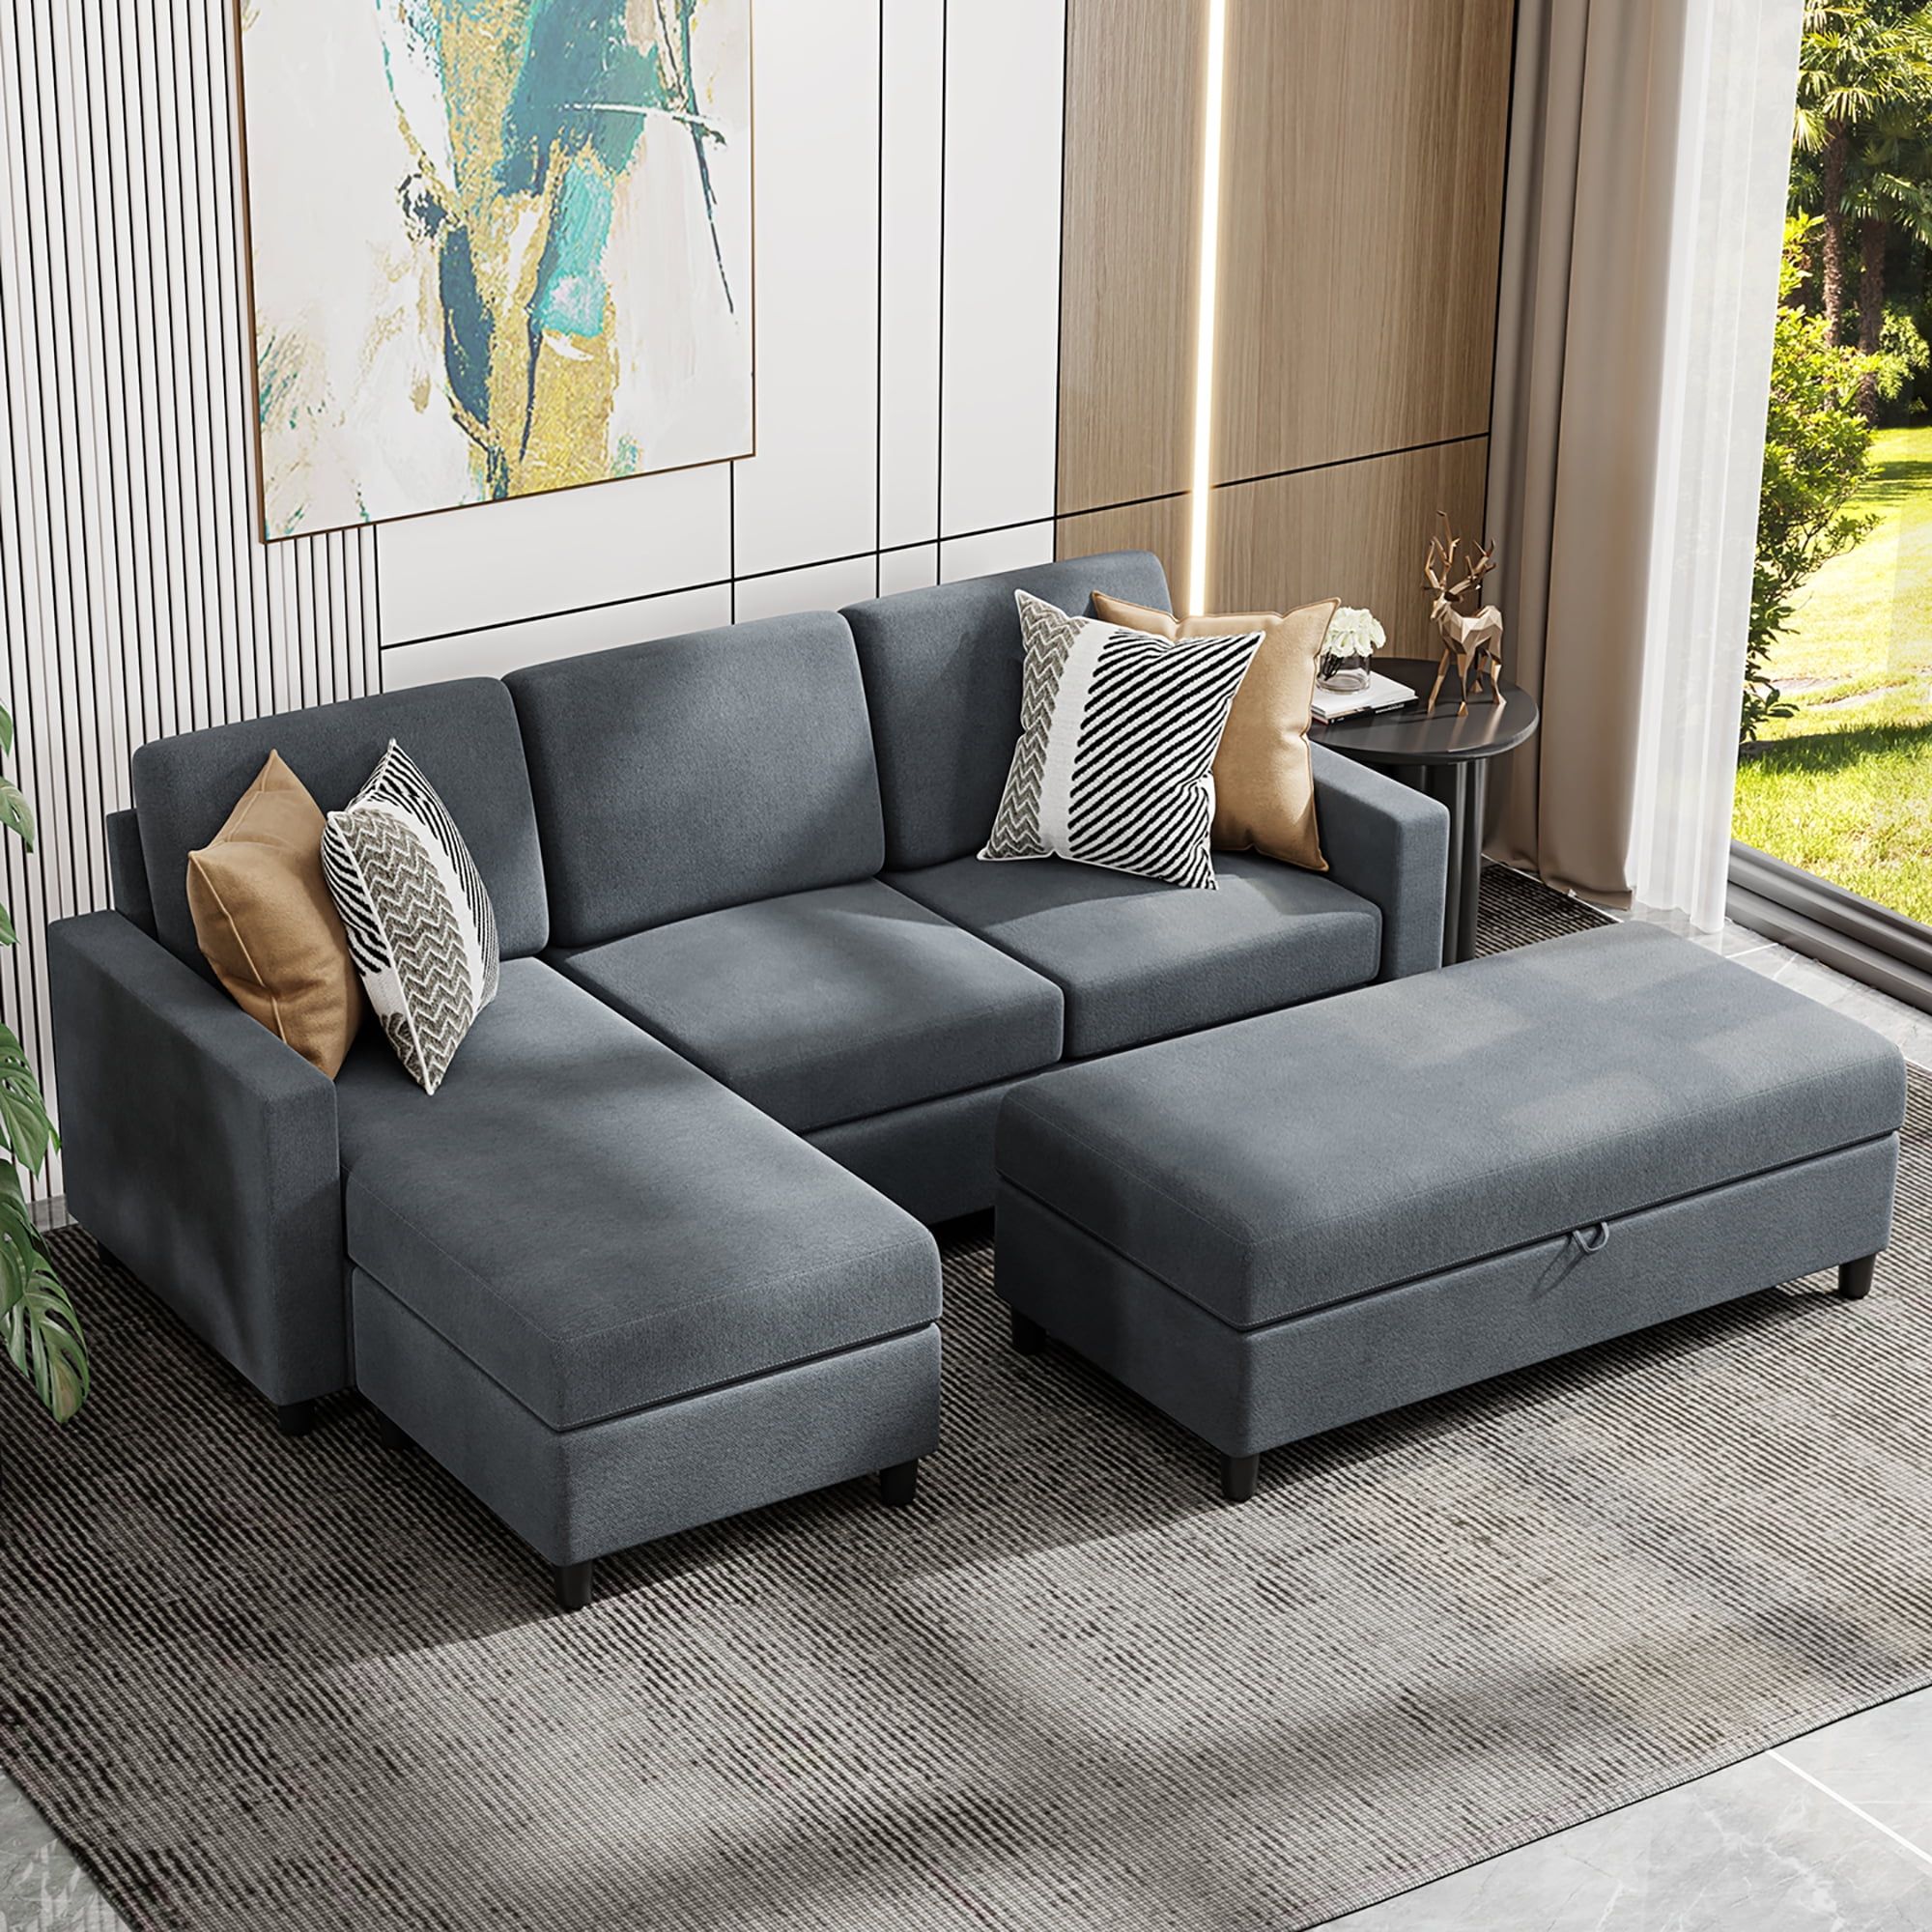 Convertible Sectional Sofa Couch With Storage Ottoman, L Shaped Wide  Reversible Chaise With Linen Fabric(Charcoal Grey) – Walmart Pertaining To Sofas With Ottomans (View 7 of 15)